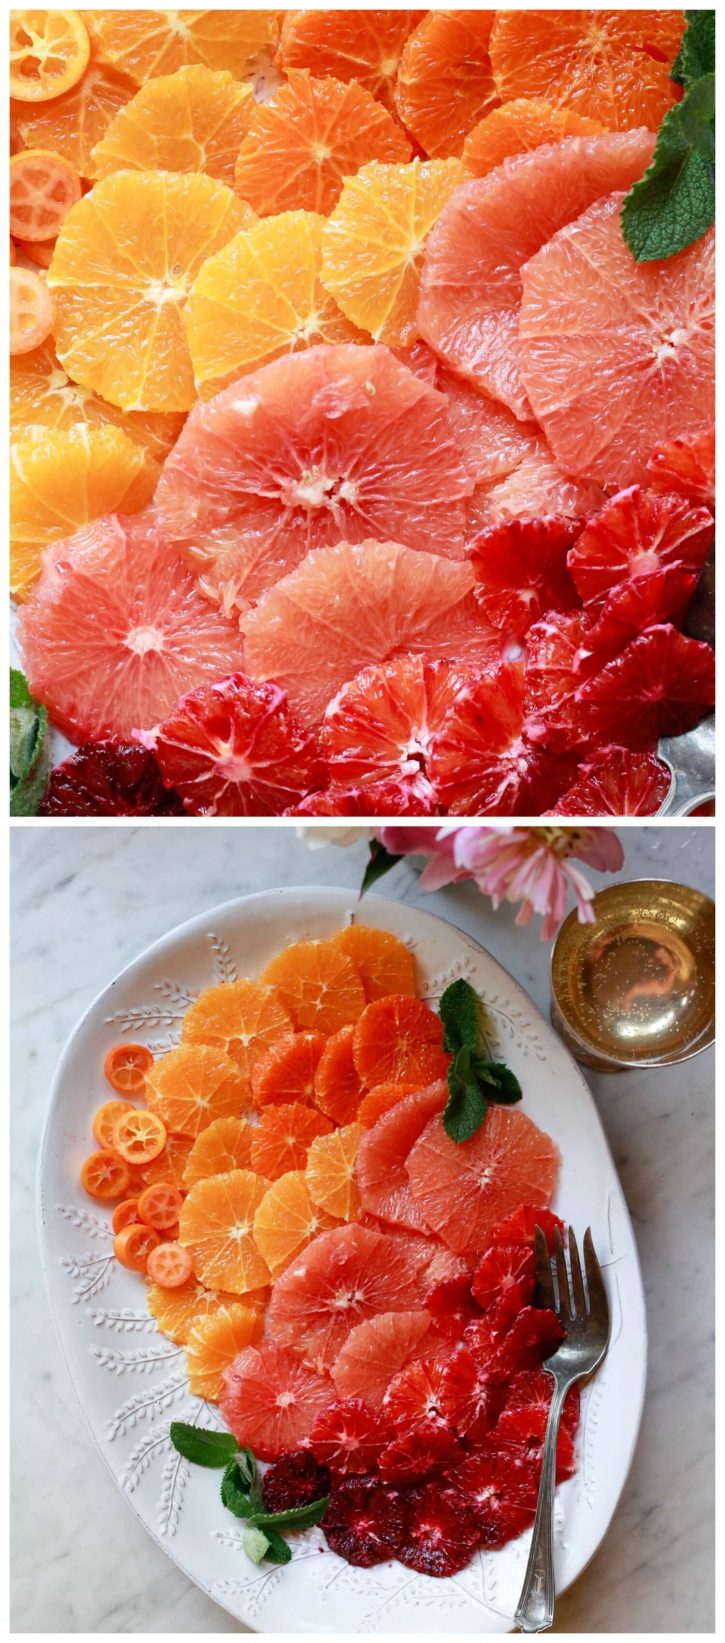 Citrus fruit salad recipe. Orange, blood orange, grapefruit, and kumquat slices arranged in an ombre pattern on an oval serving platter. A beautiful, easy, and healthy brunch or meal prep recipe. 